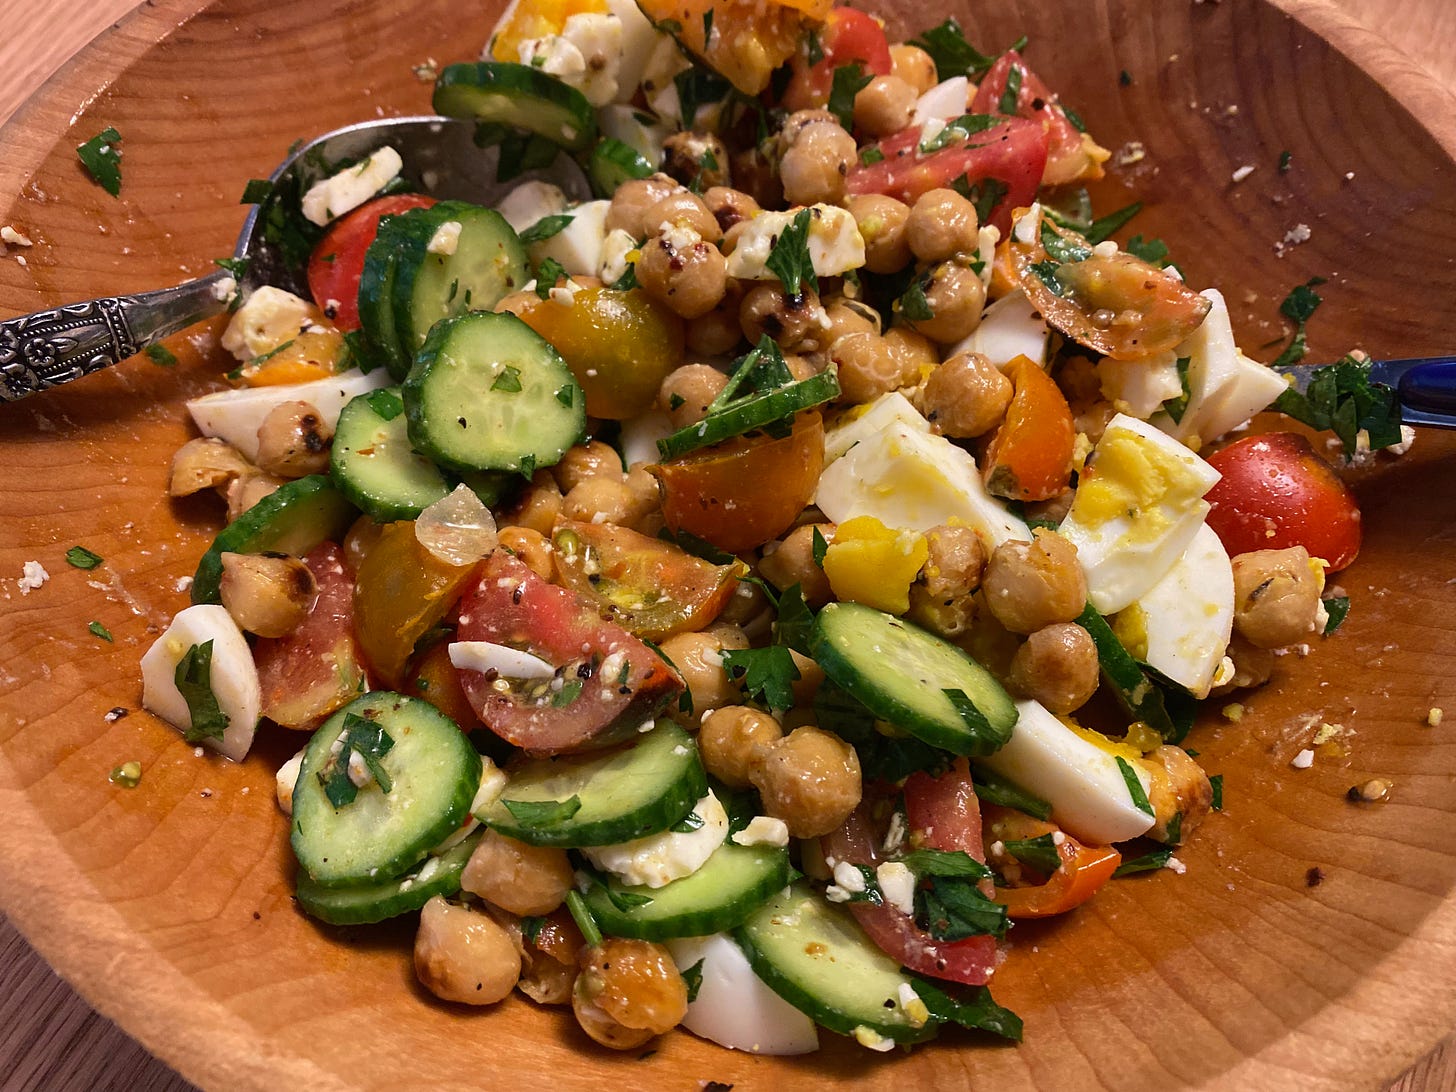 A wooden bowl filled with salad of chickpeas, cucumbers, bright red and orange cherry tomatoes, and hardboiled eggs.